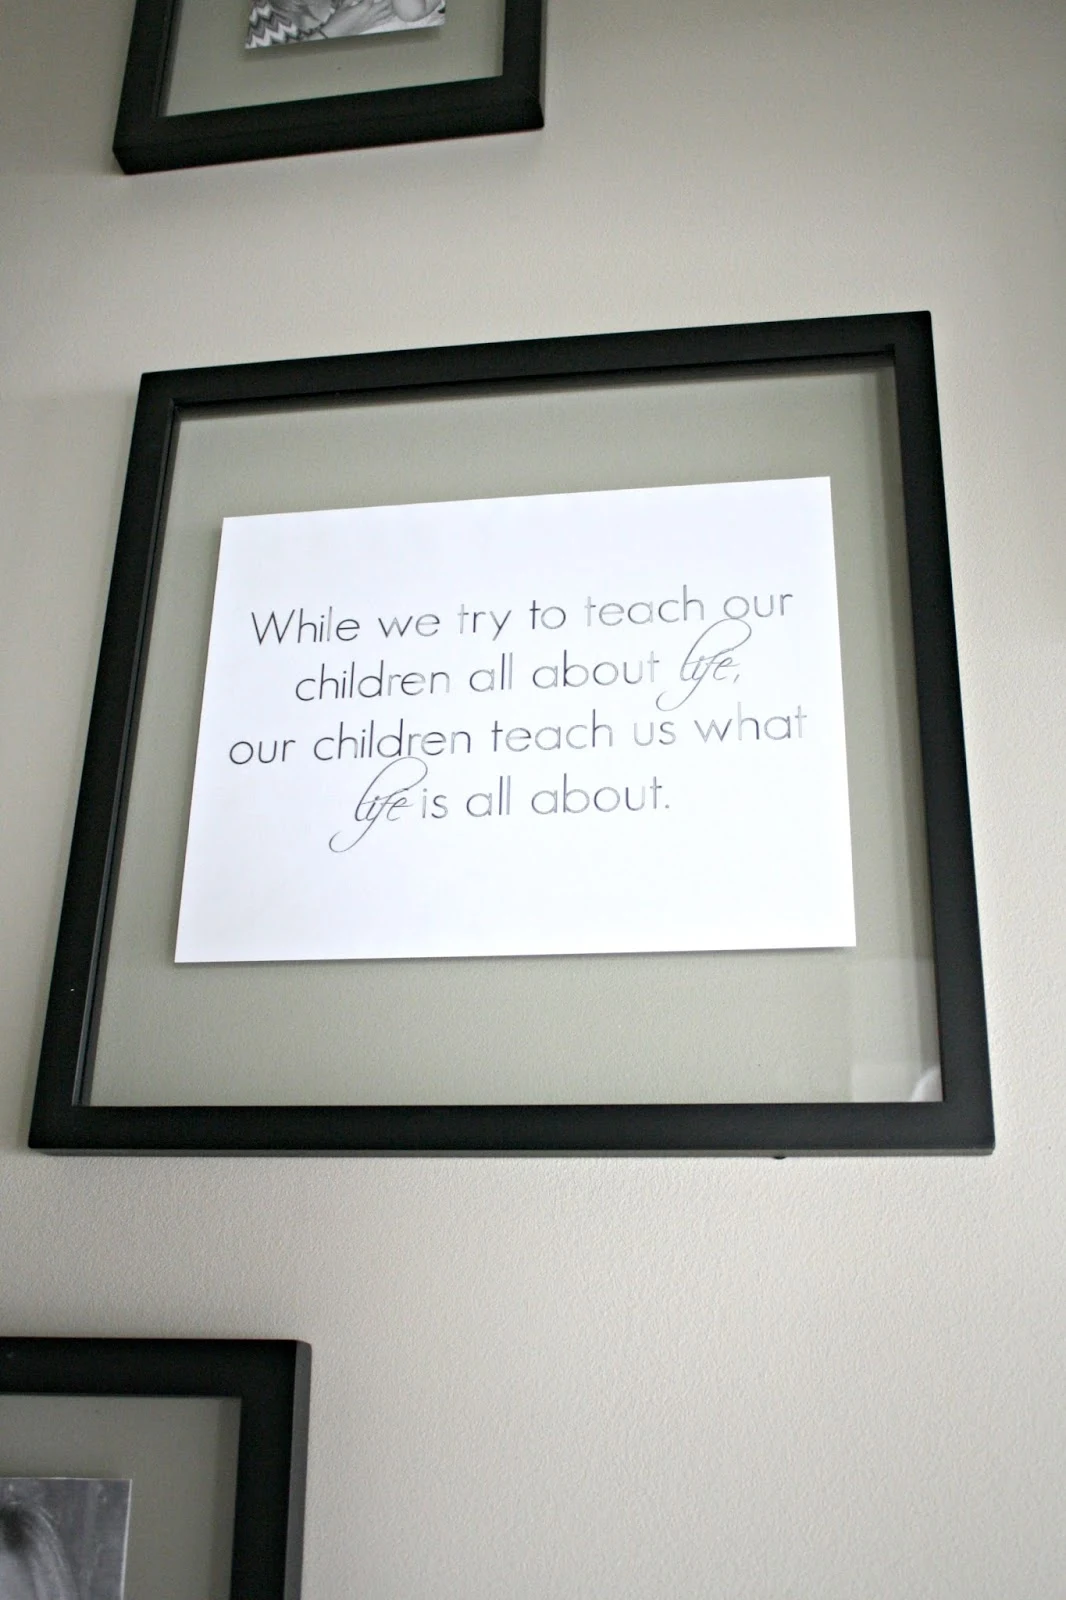 While we try to teach our children quote